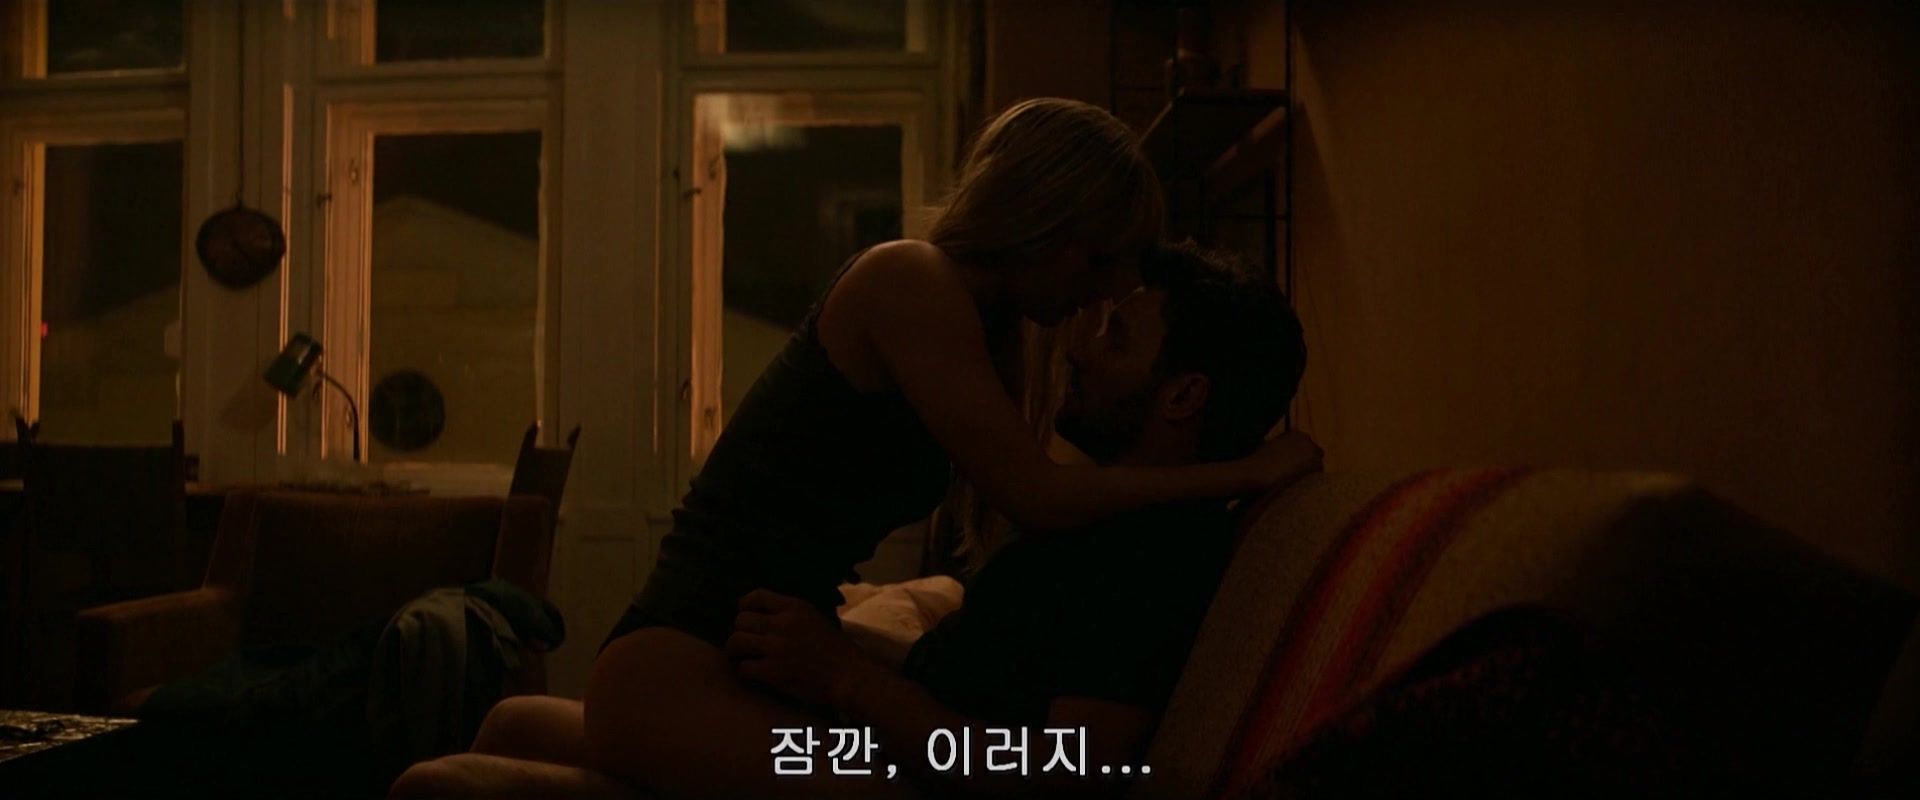 Smooth Jennifer Lawrence nude - Red Sparrow (2018) Full HD Sex